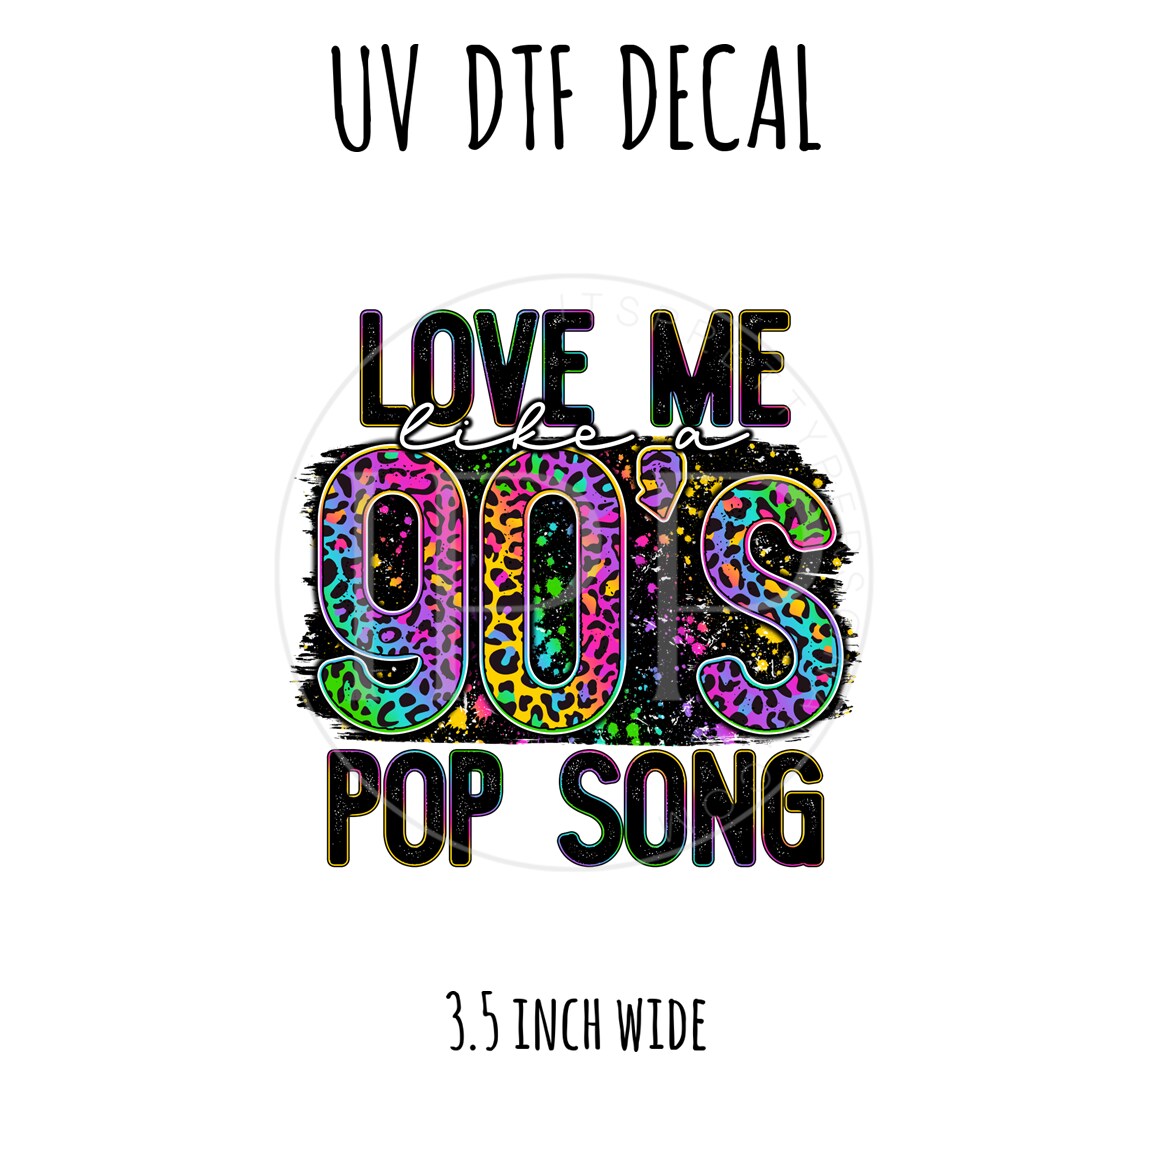 #49- 90s Pop Song 3.5 inch wide UV DTF decal